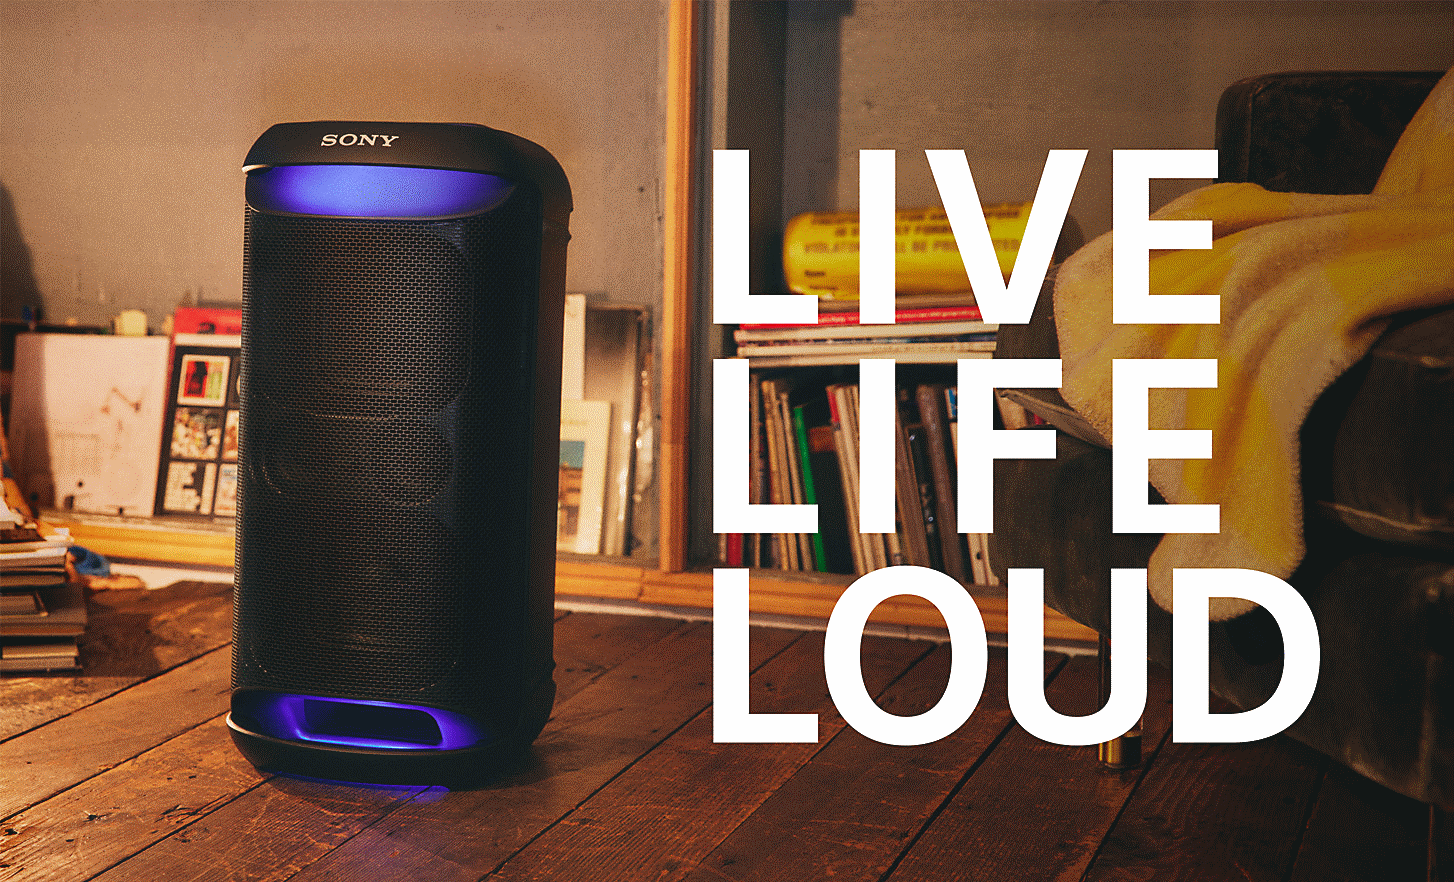 The SRS-XV500 in a stylish home, illuminated with blue lighting. Overlaying the image are the words 'LIVE LIFE LOUD'